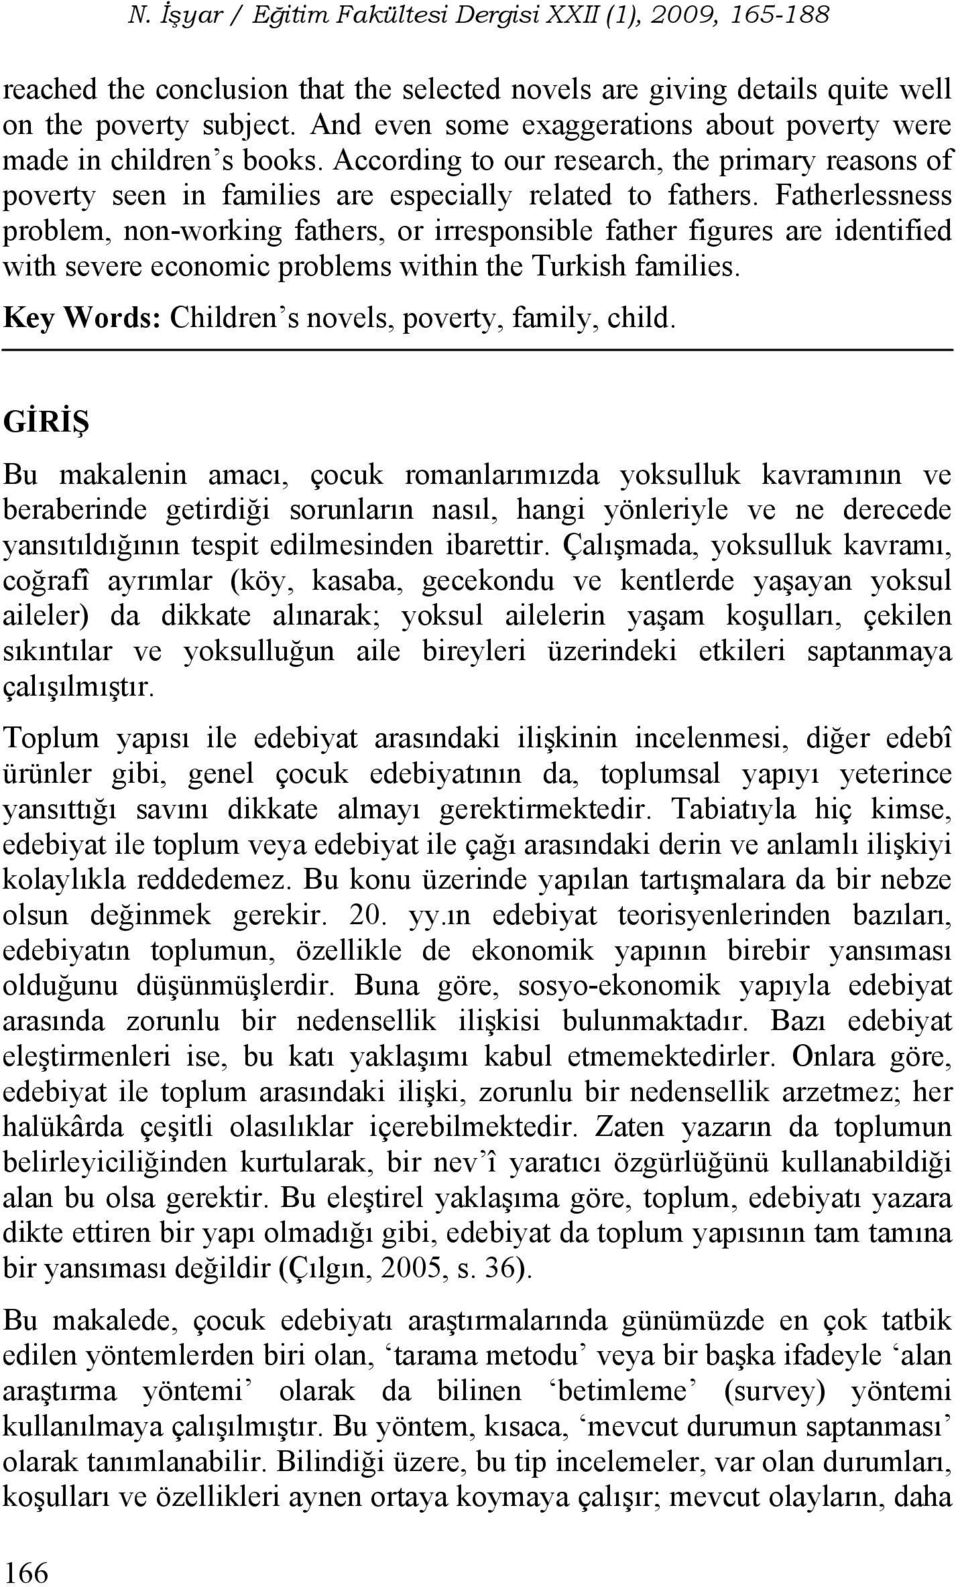 Fatherlessness problem, non-working fathers, or irresponsible father figures are identified with severe economic problems within the Turkish families.